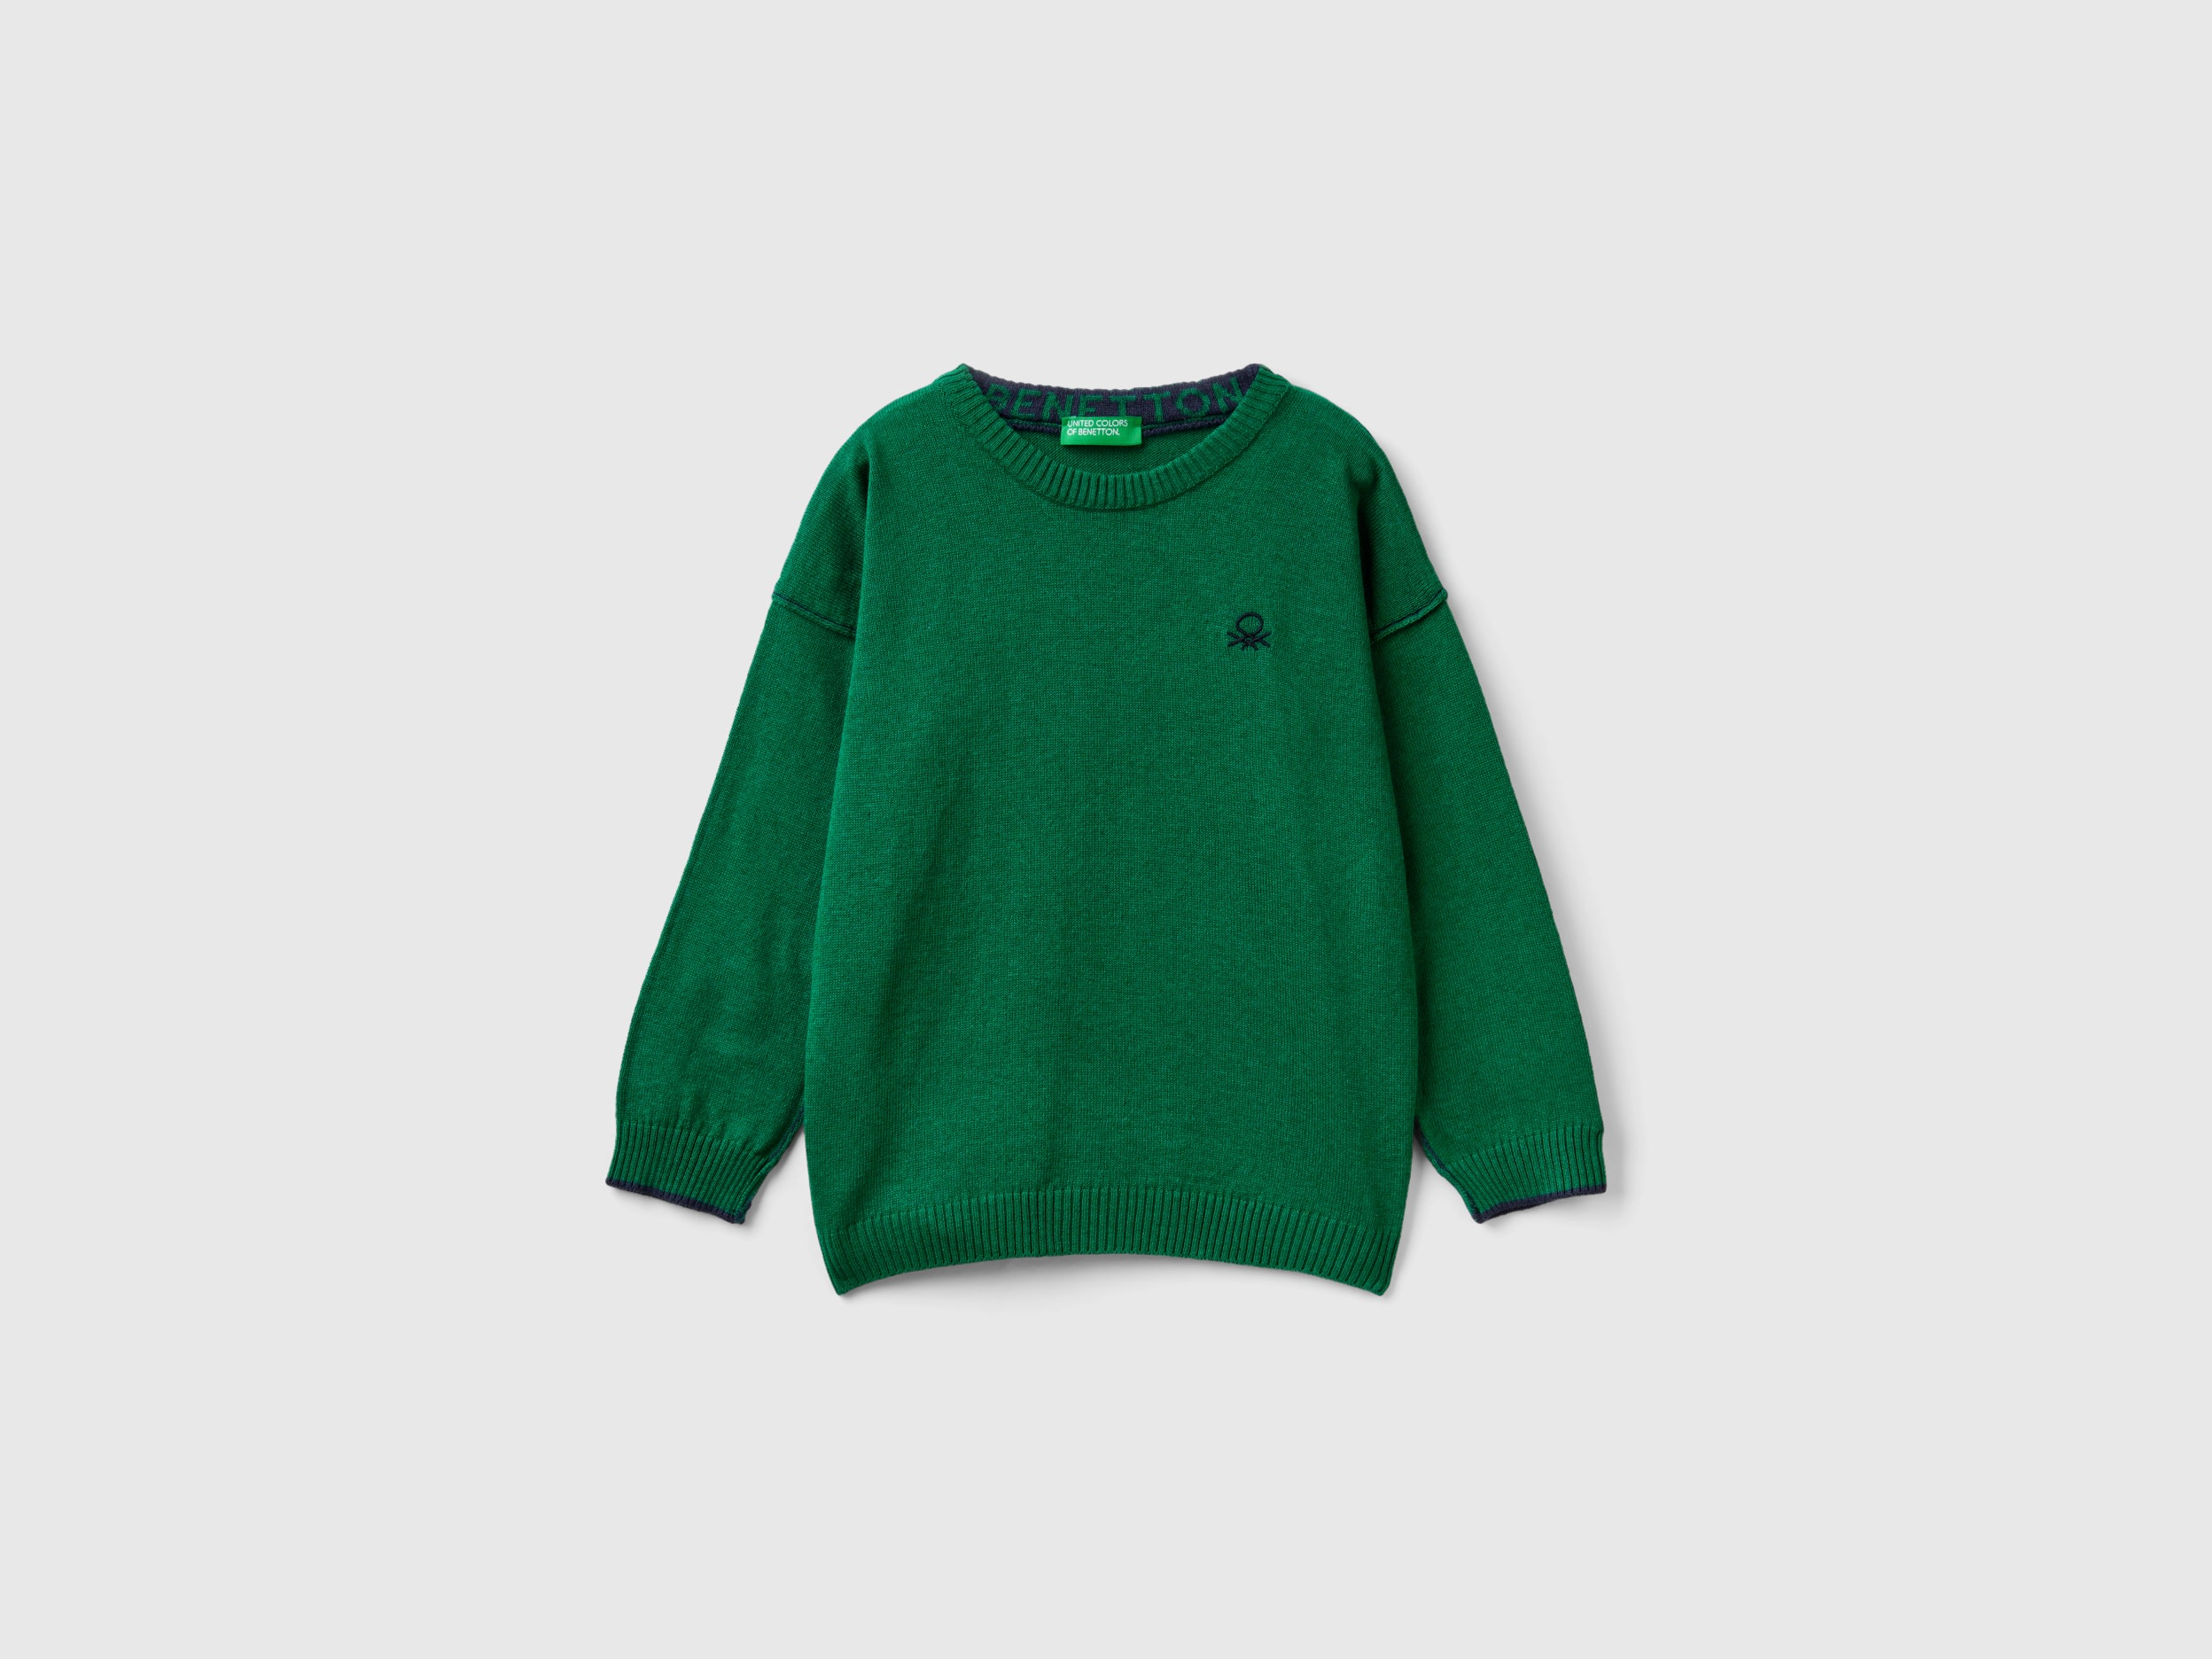 Benetton, Crew Neck Sweater With Embroidery, size 3-4, Green, Kids